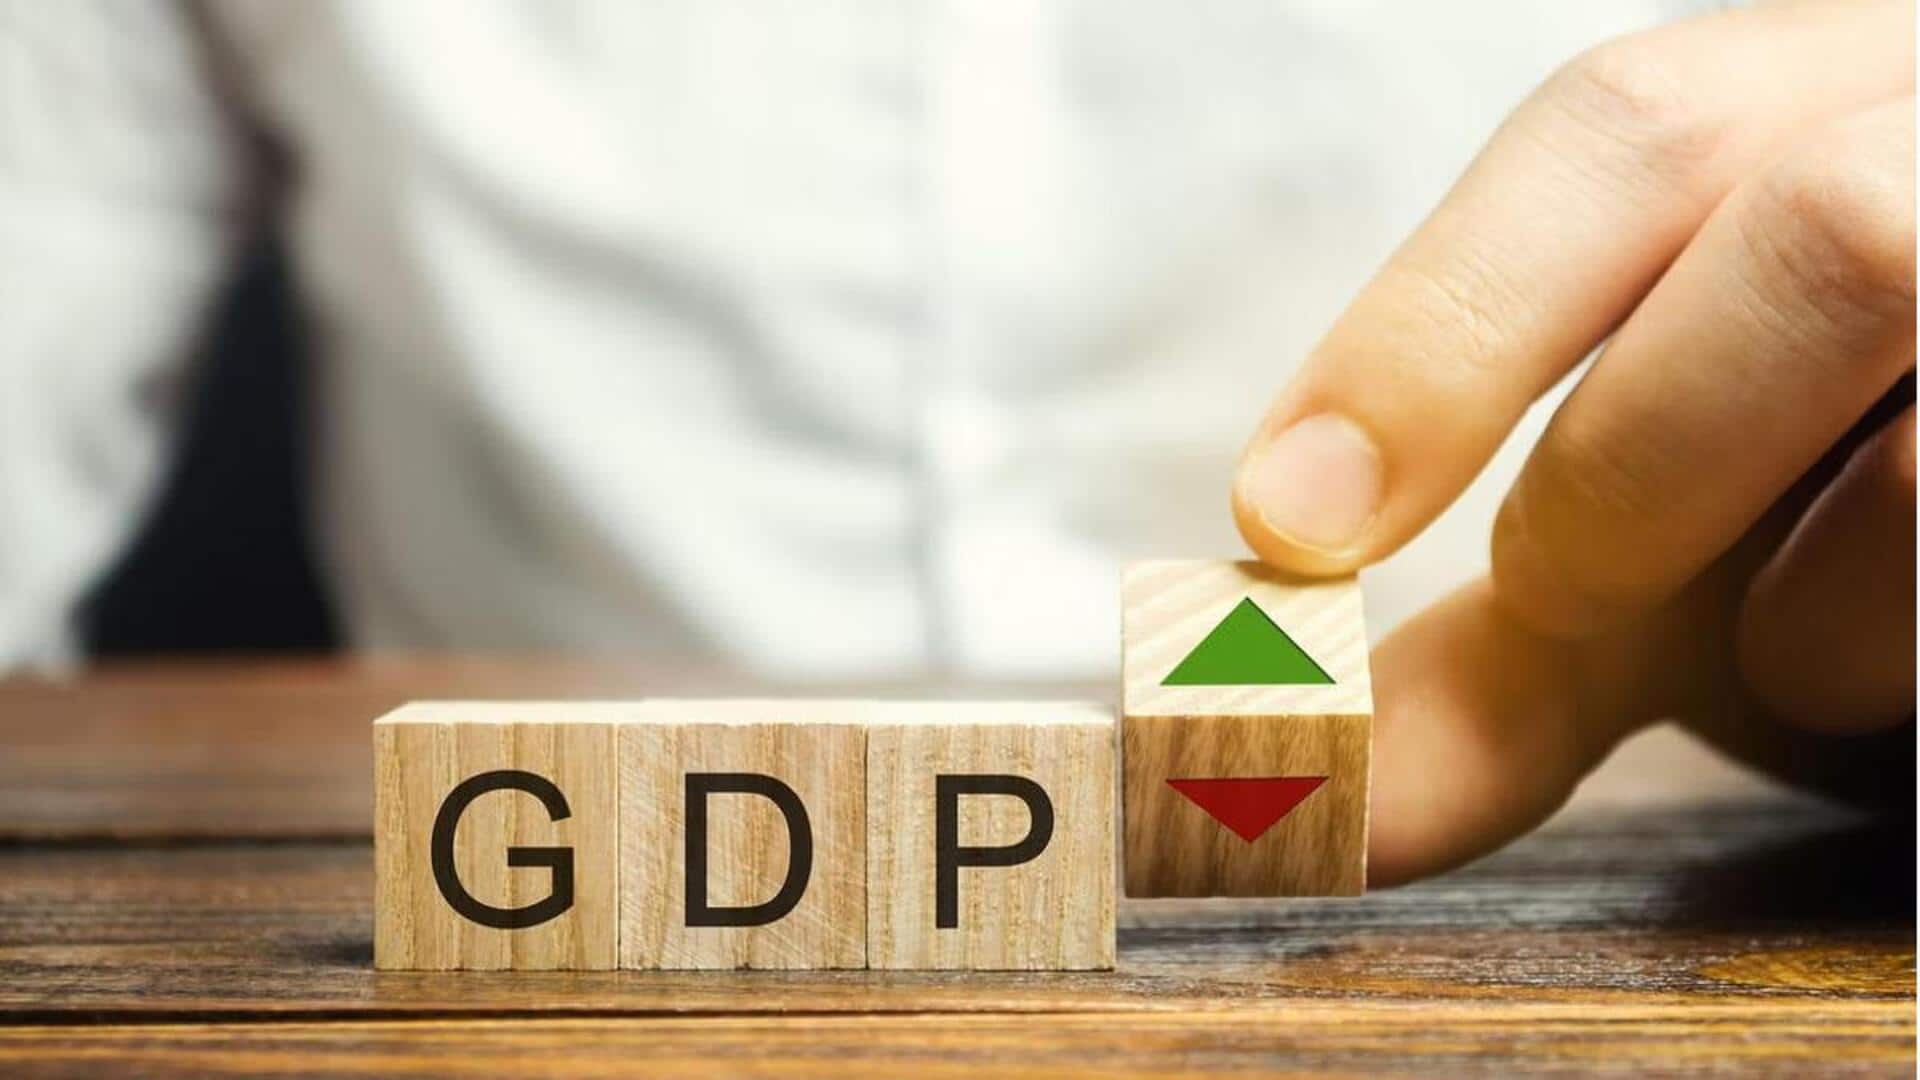 India's Q2 GDP likely grew 7%, exceeding MPC's 6.5% forecast